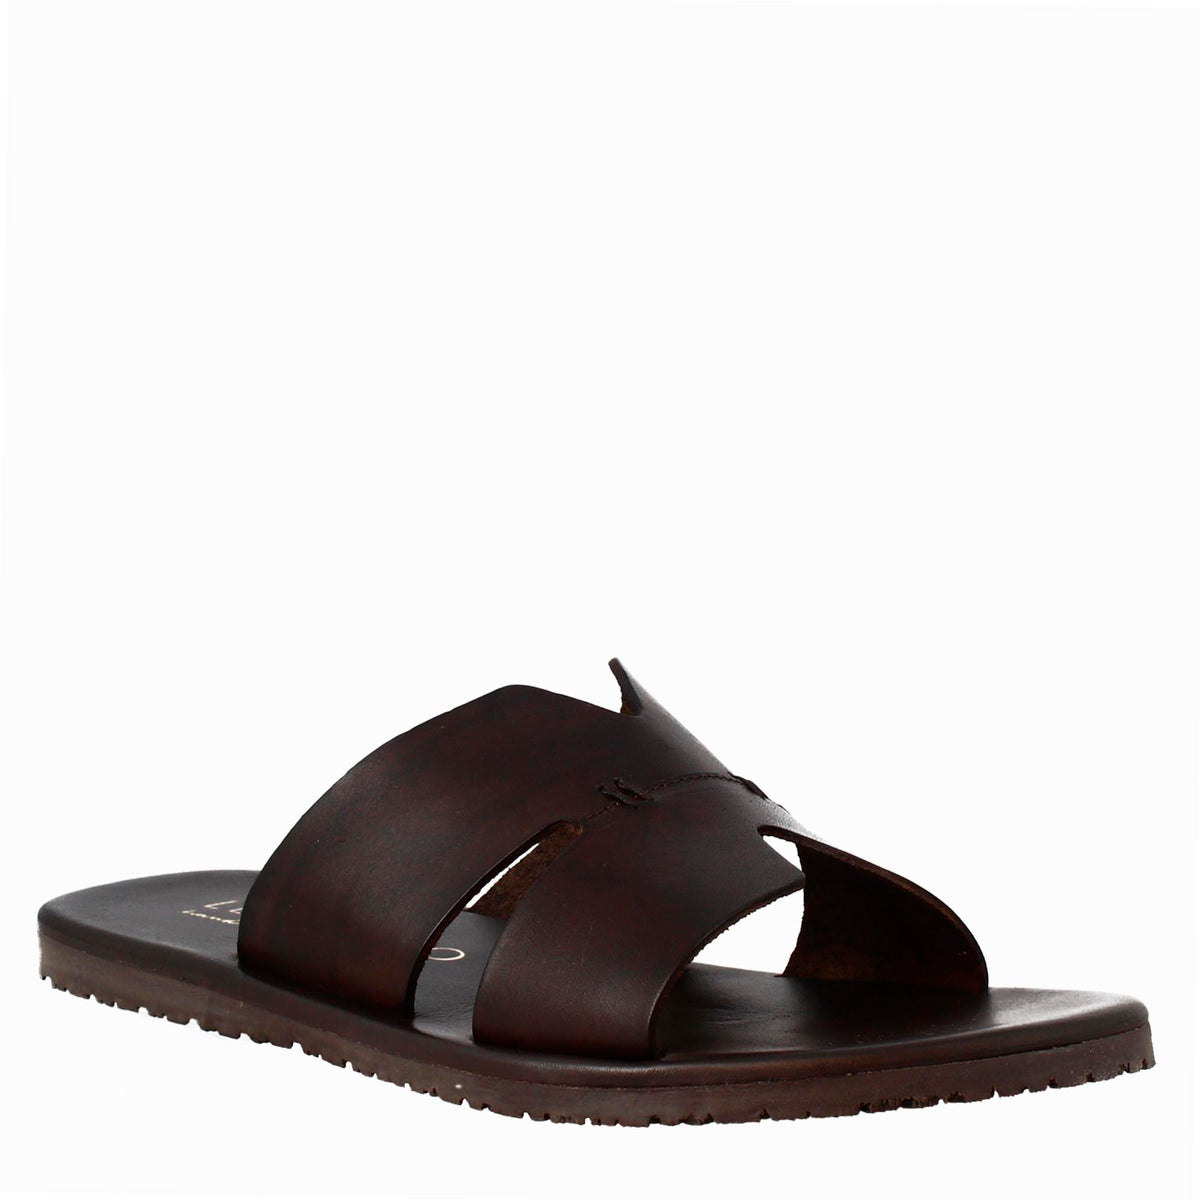 Men's H-shaped sandals in dark brown leather